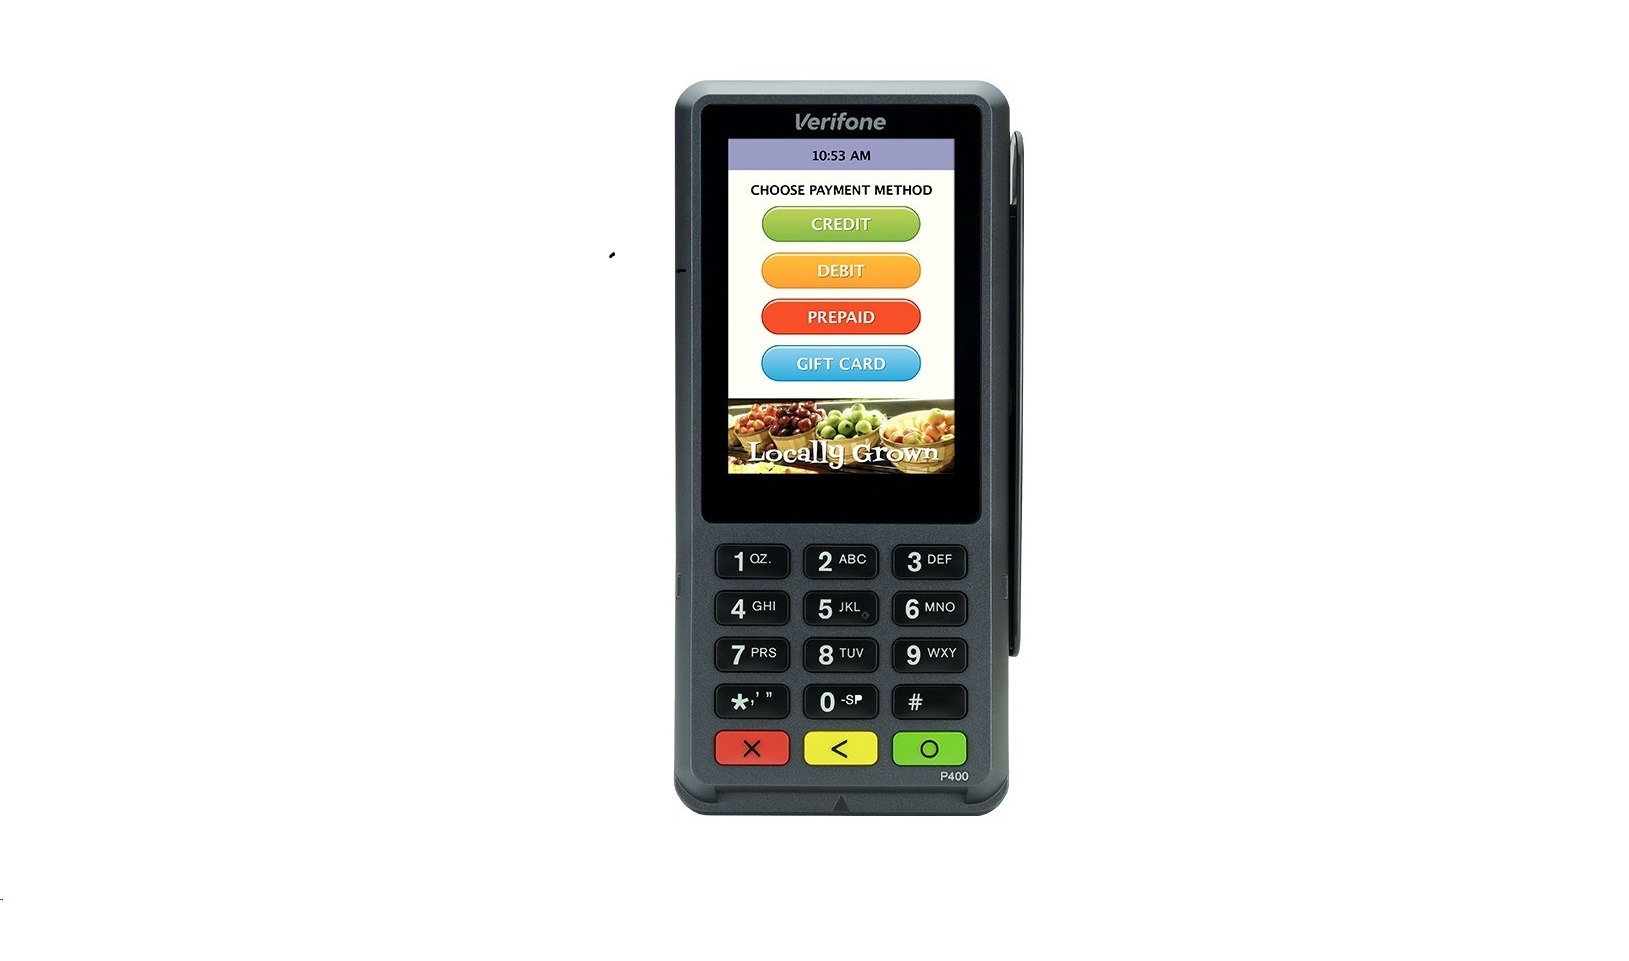 Verifone P400 Cortex-A9 600MHz 512MB Standard KeyPad 3.5 Hvga V/OS Payment Terminal Only M435-003-04-NAA-5